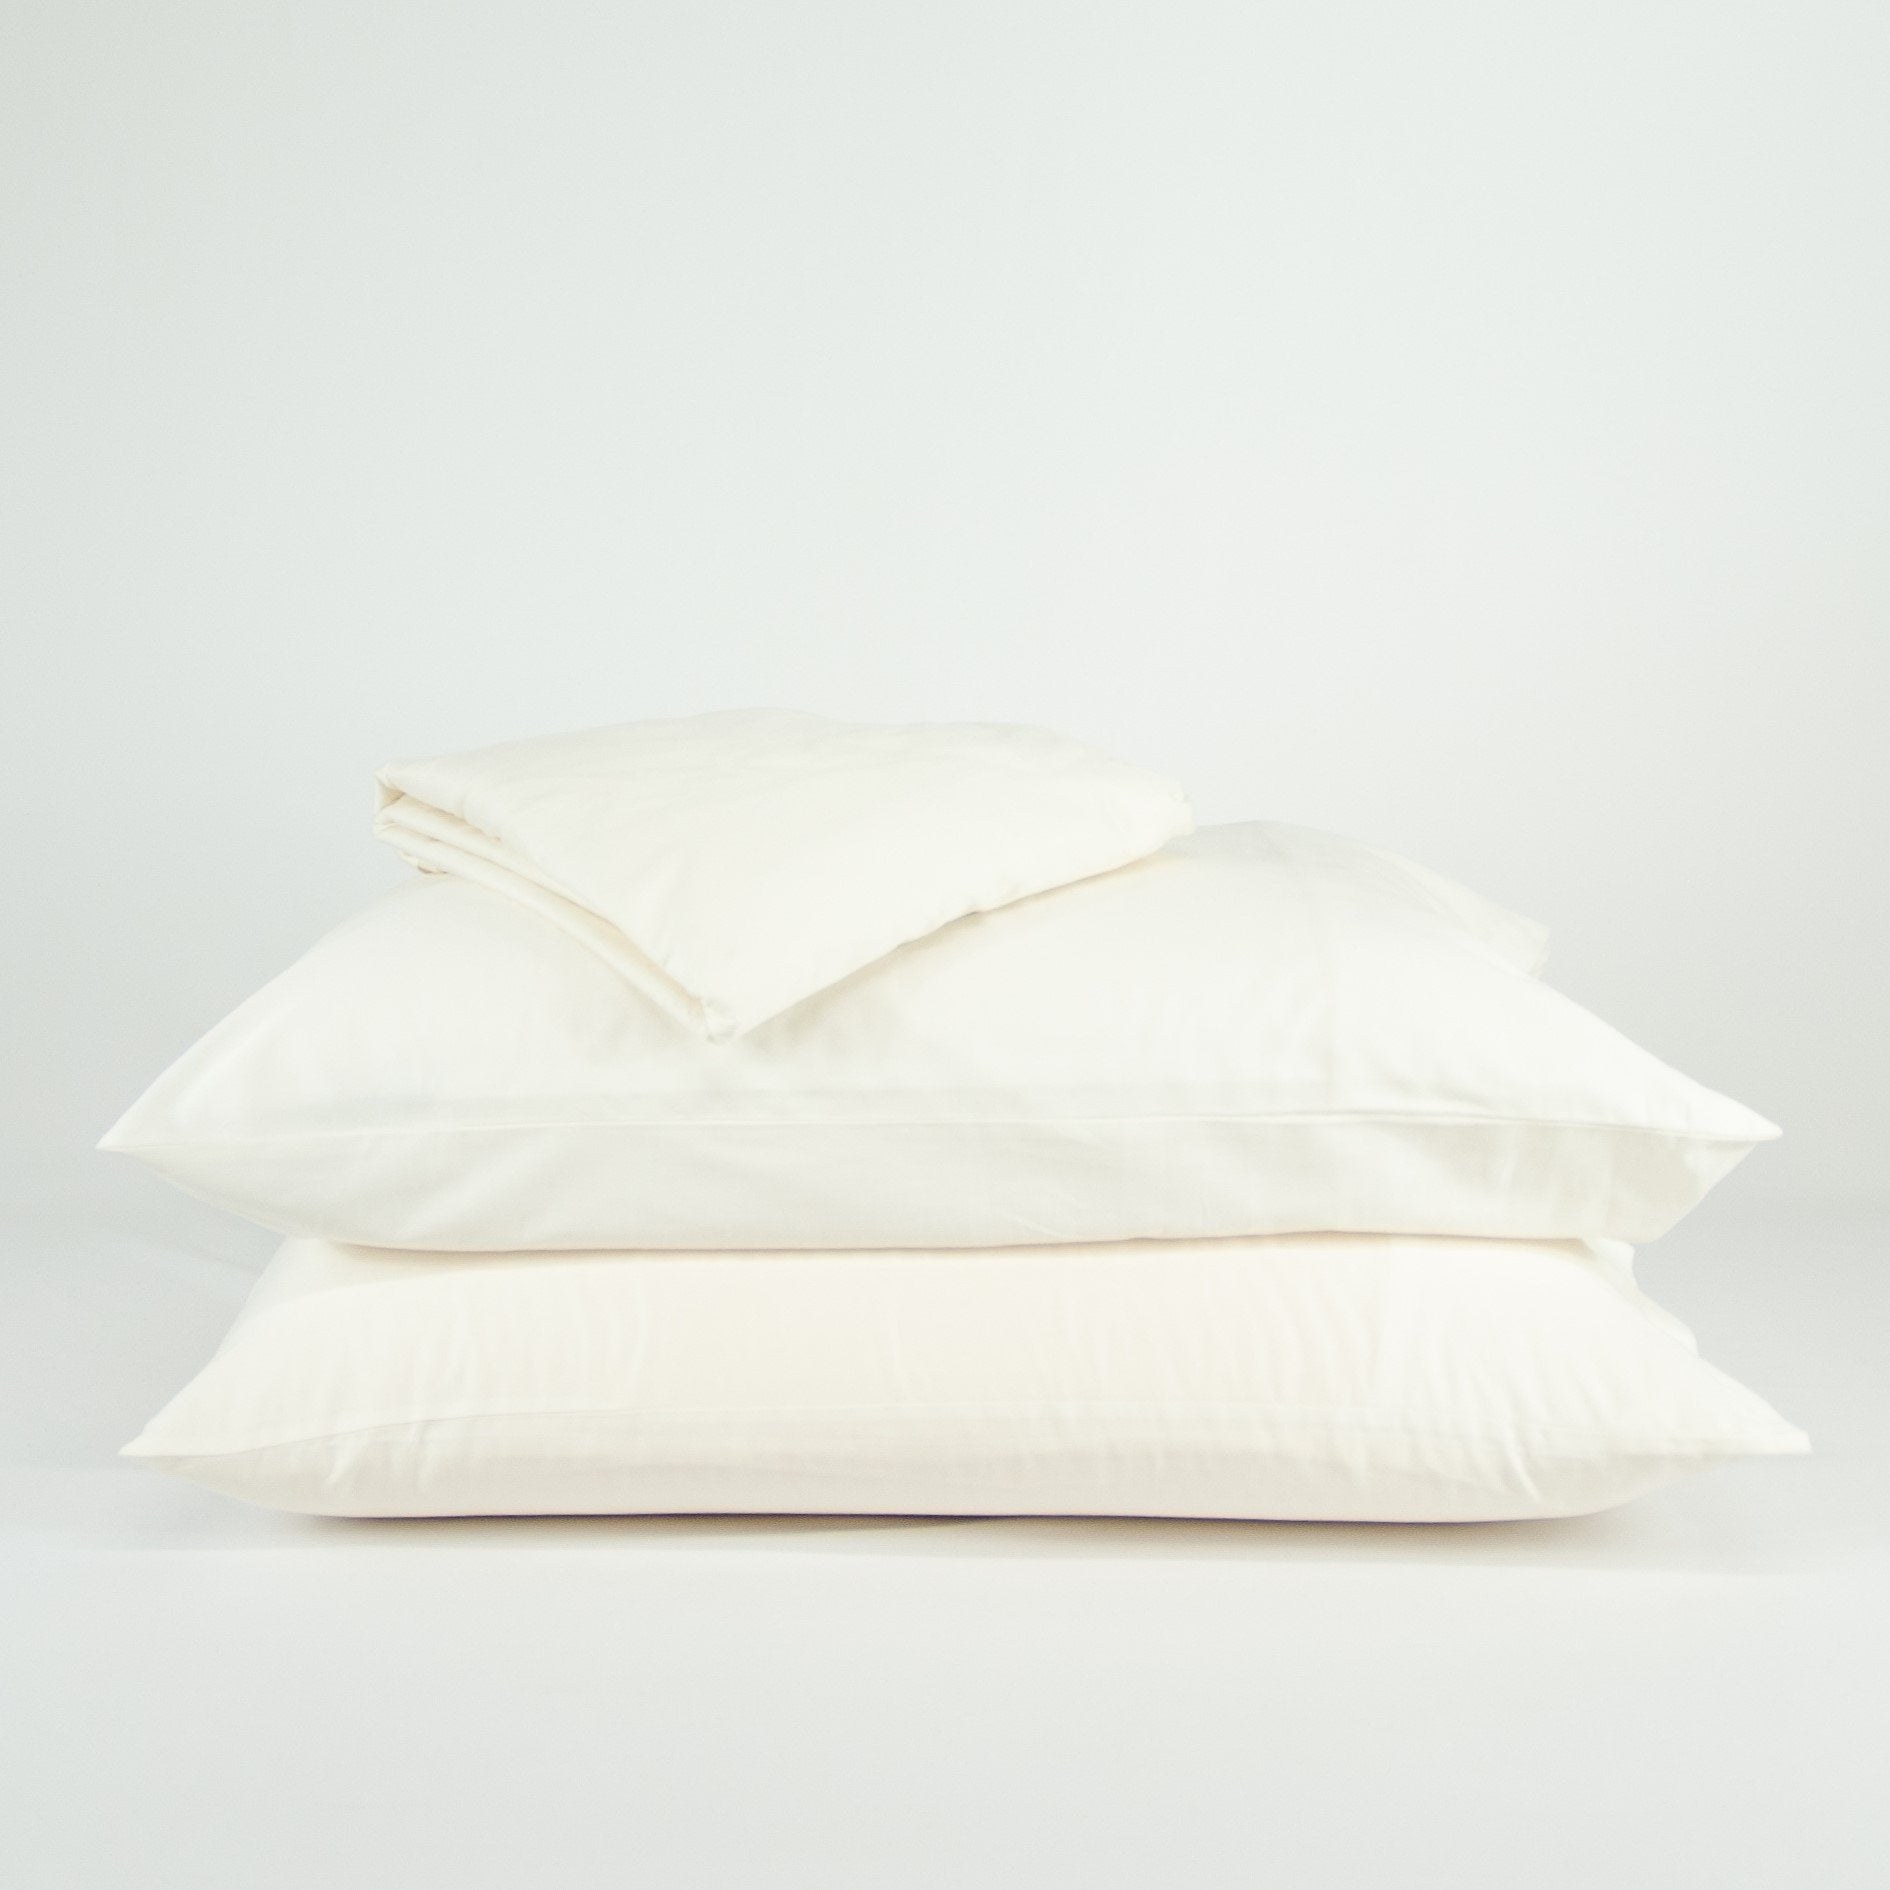 Stacked organic cotton pillowcases and sheets in warm white